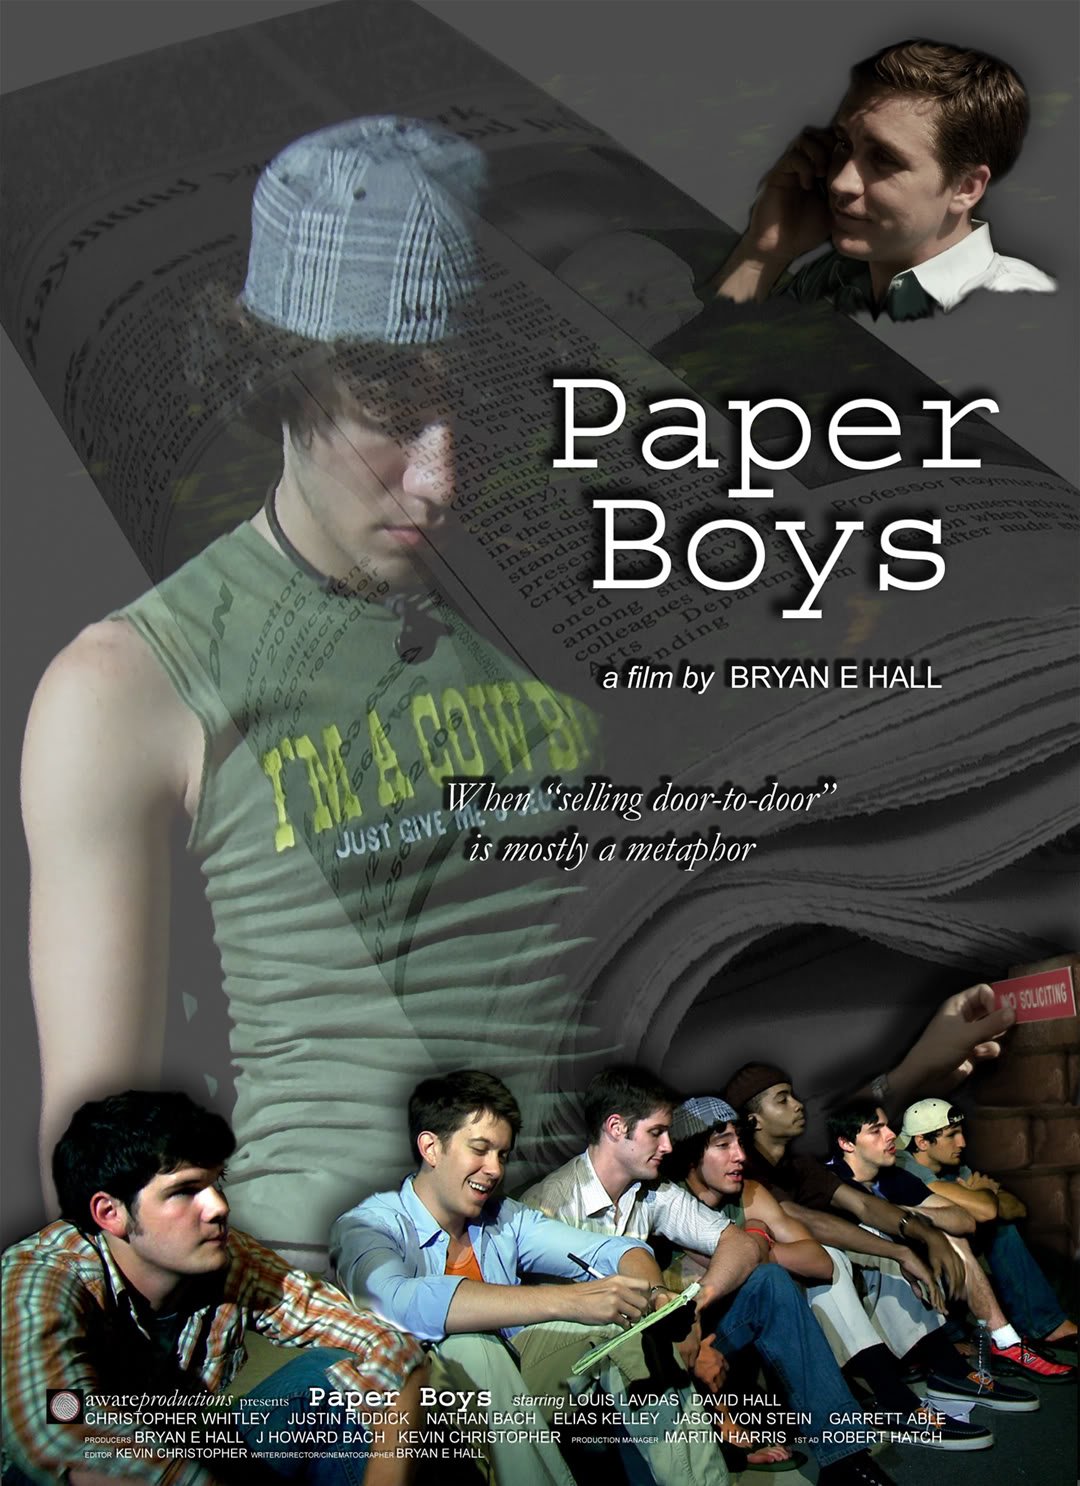 Poster of the movie Paper Boys